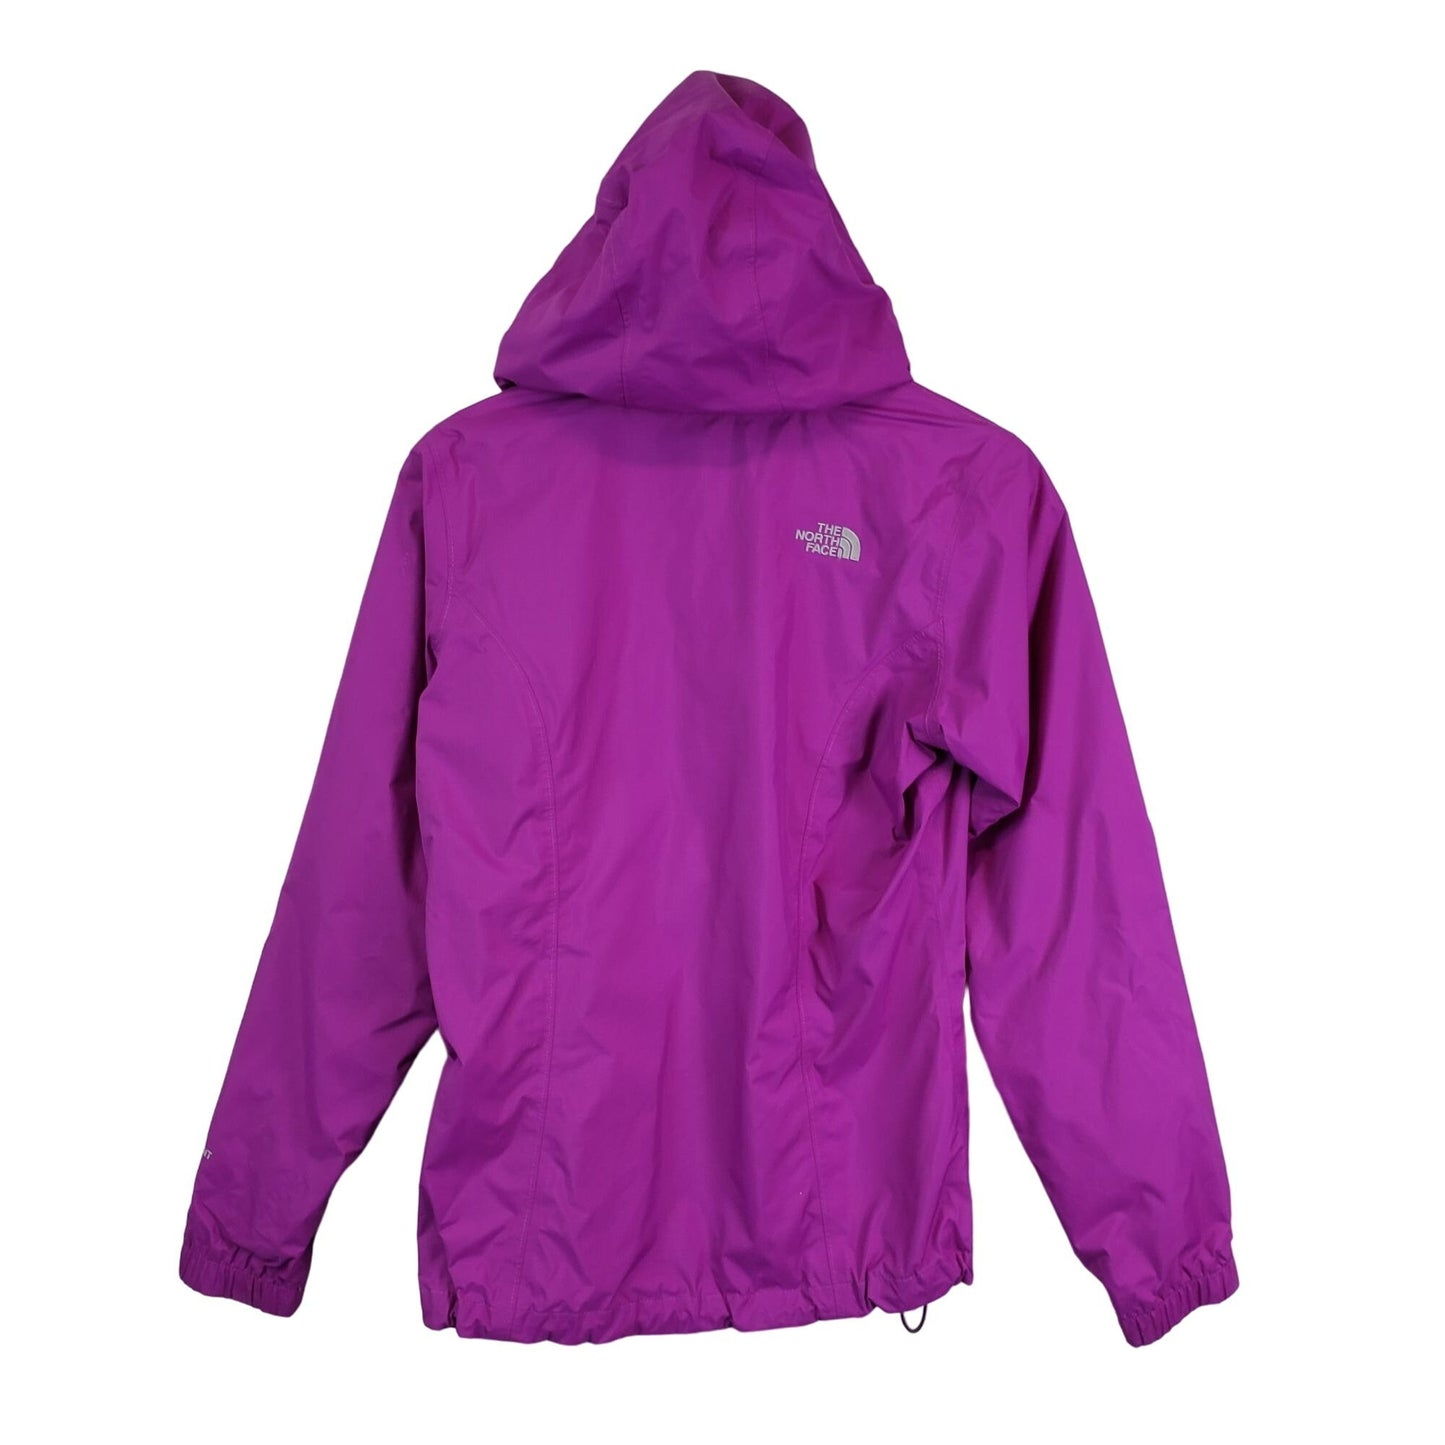 The North Face Hooded Windbreaker Jacket Size Small